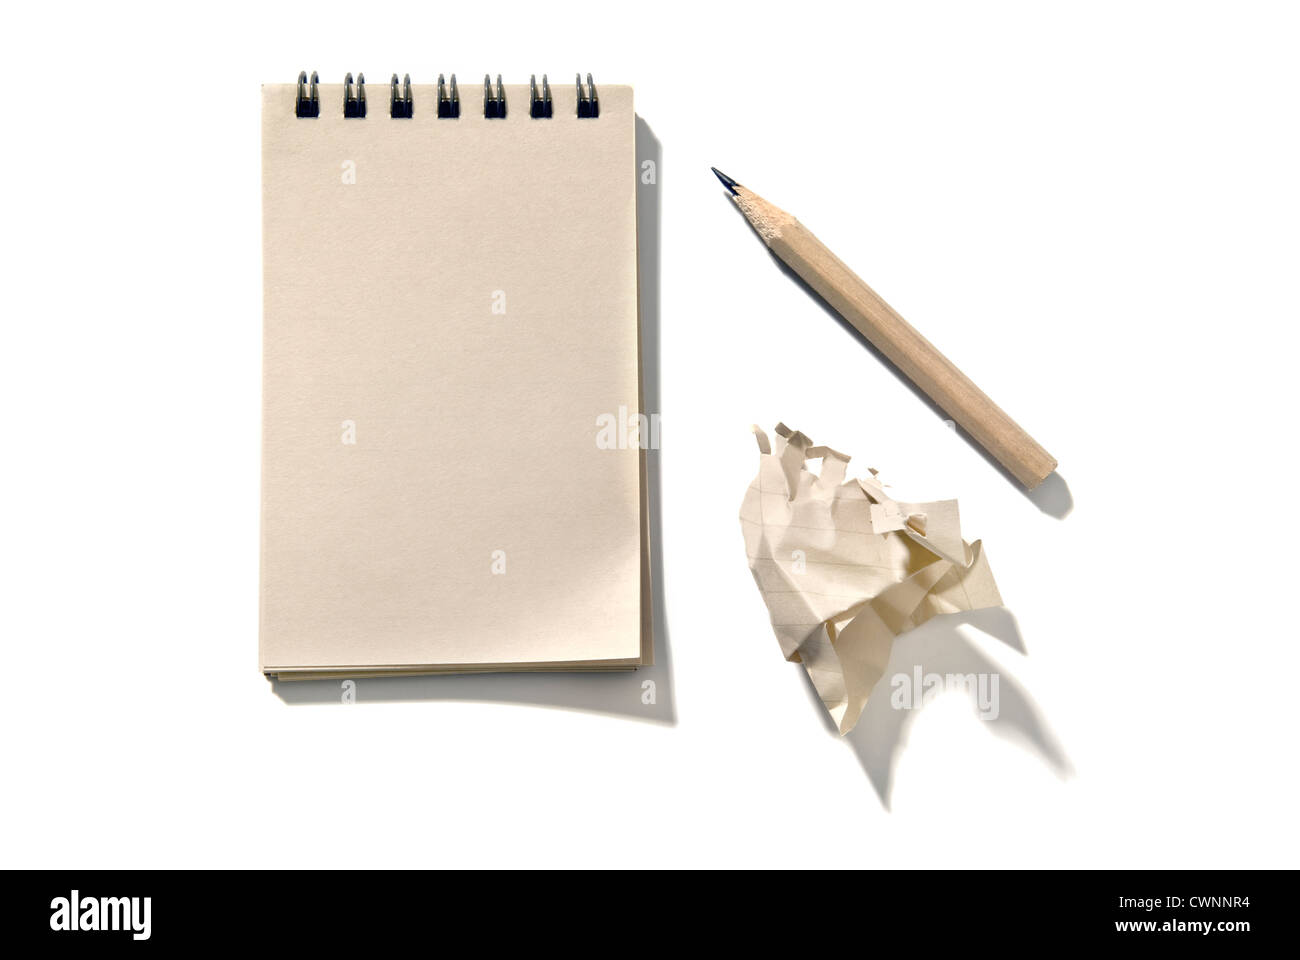 Notepad with a pencil and a piece of crumpled paper, isolated on 100% white background Stock Photo